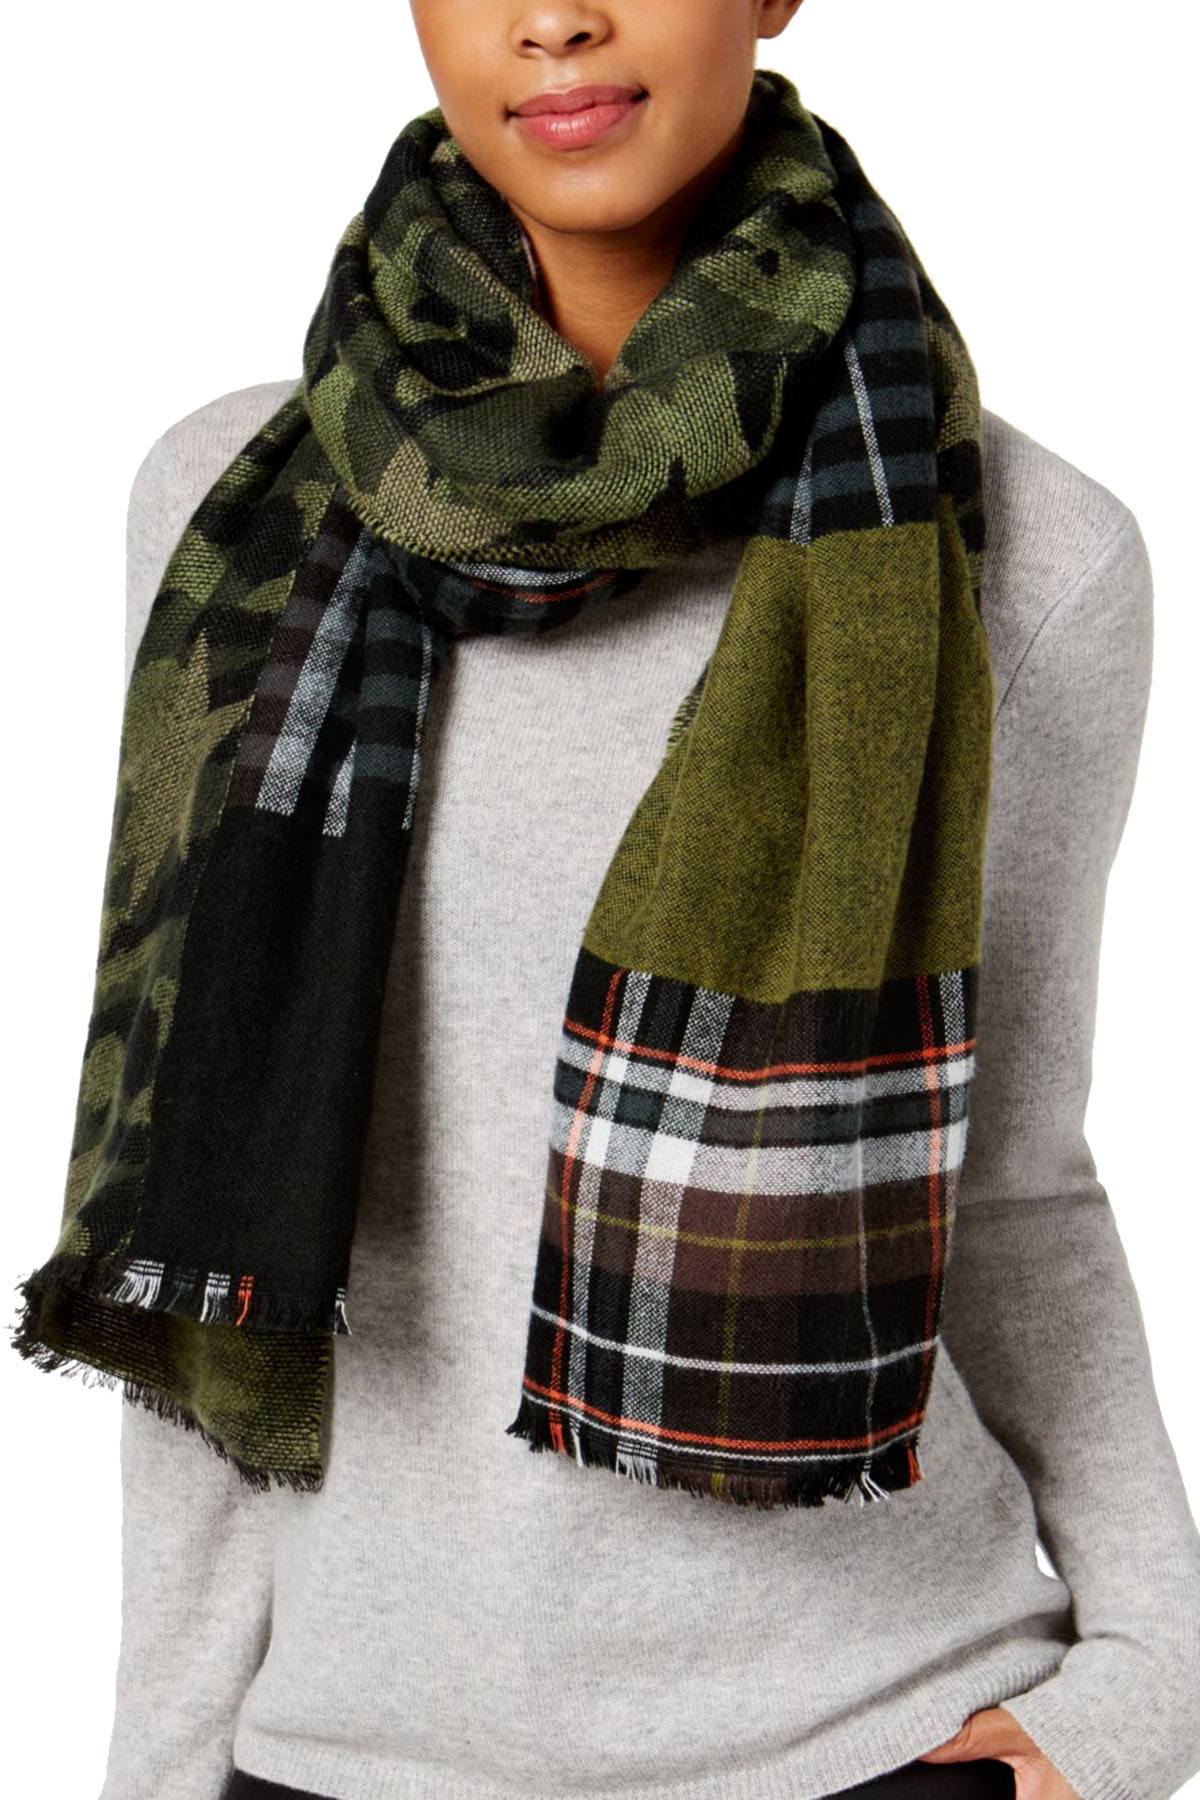 Steve Madden Olive-Camo Plaid Blanket Wrap & Scarf In One